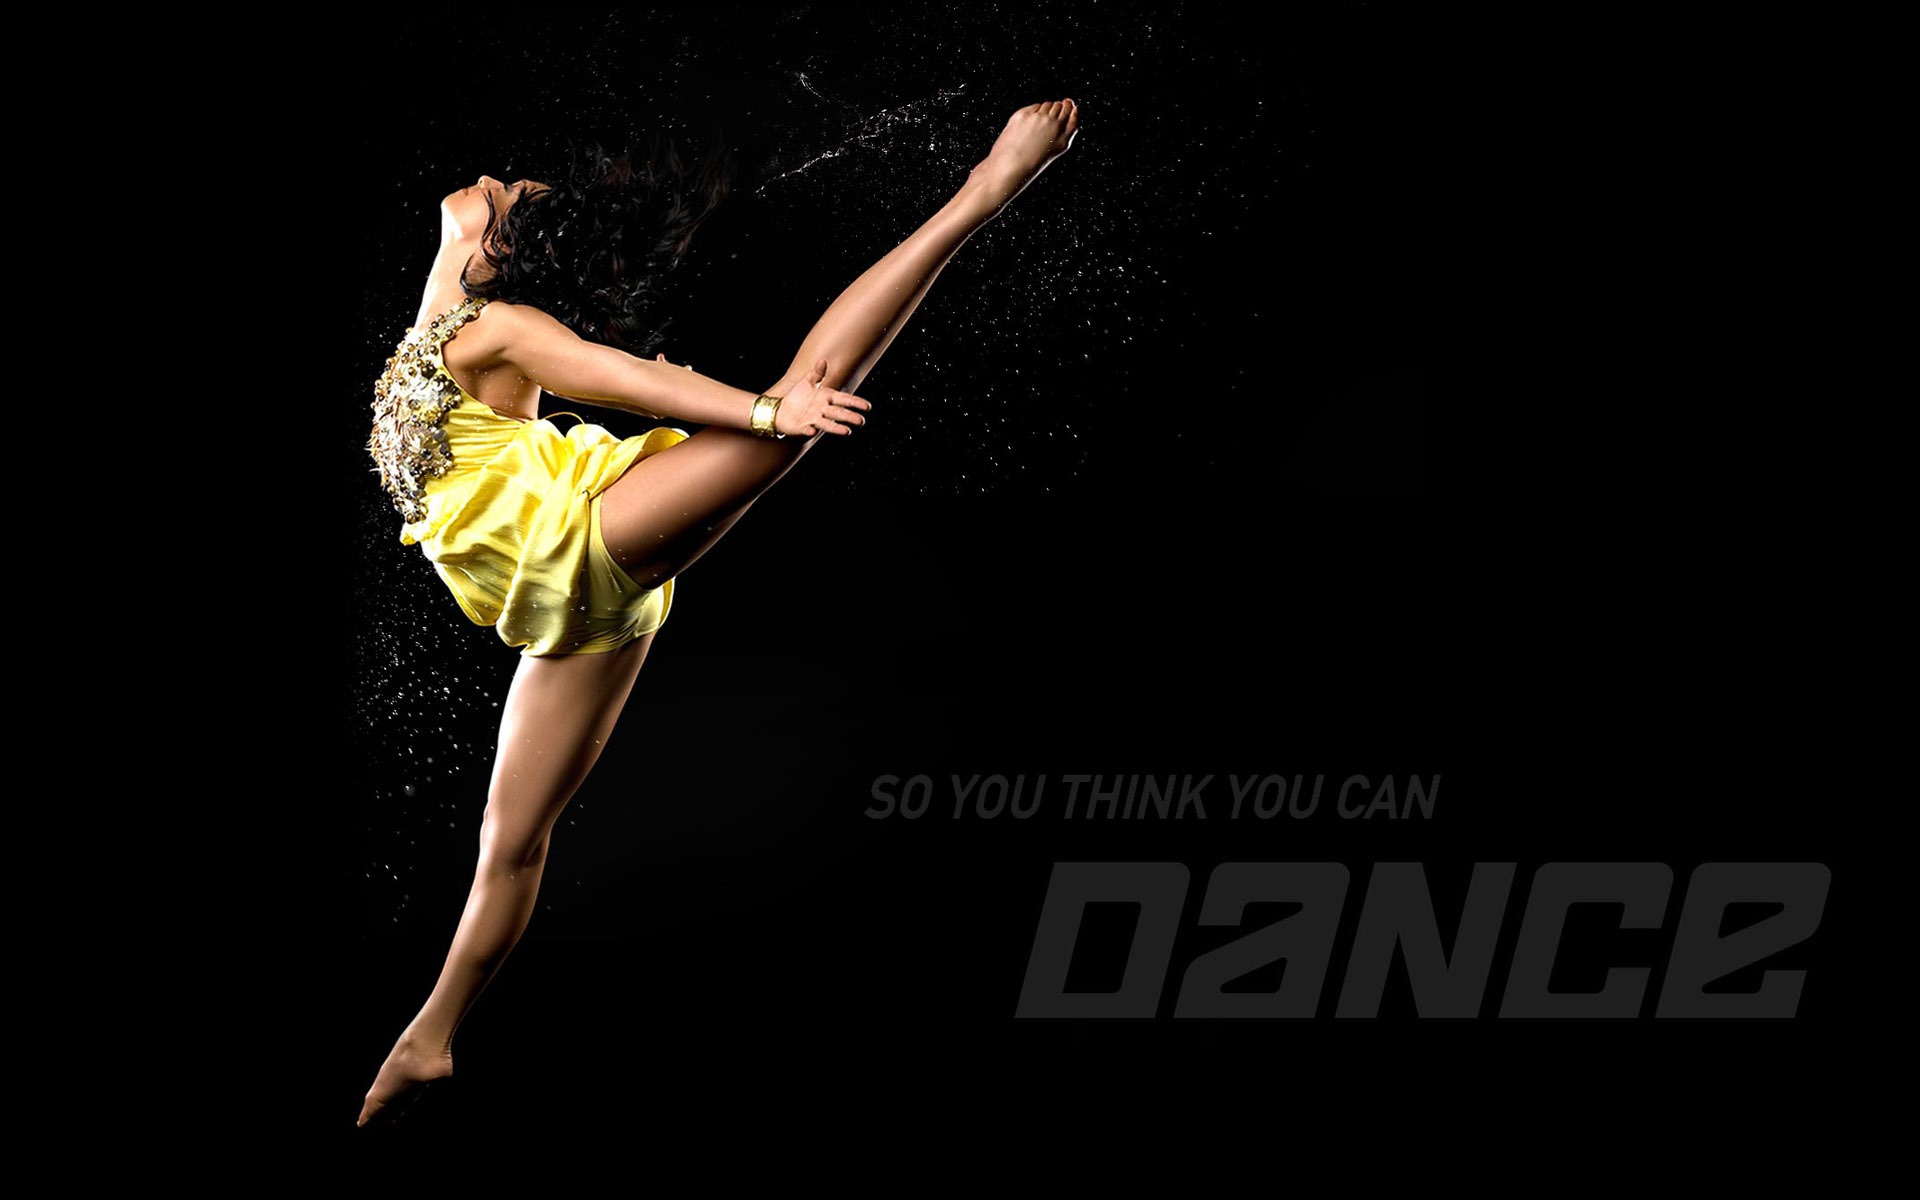 So You Think You Can Dance wallpaper (1) #19 - 1920x1200